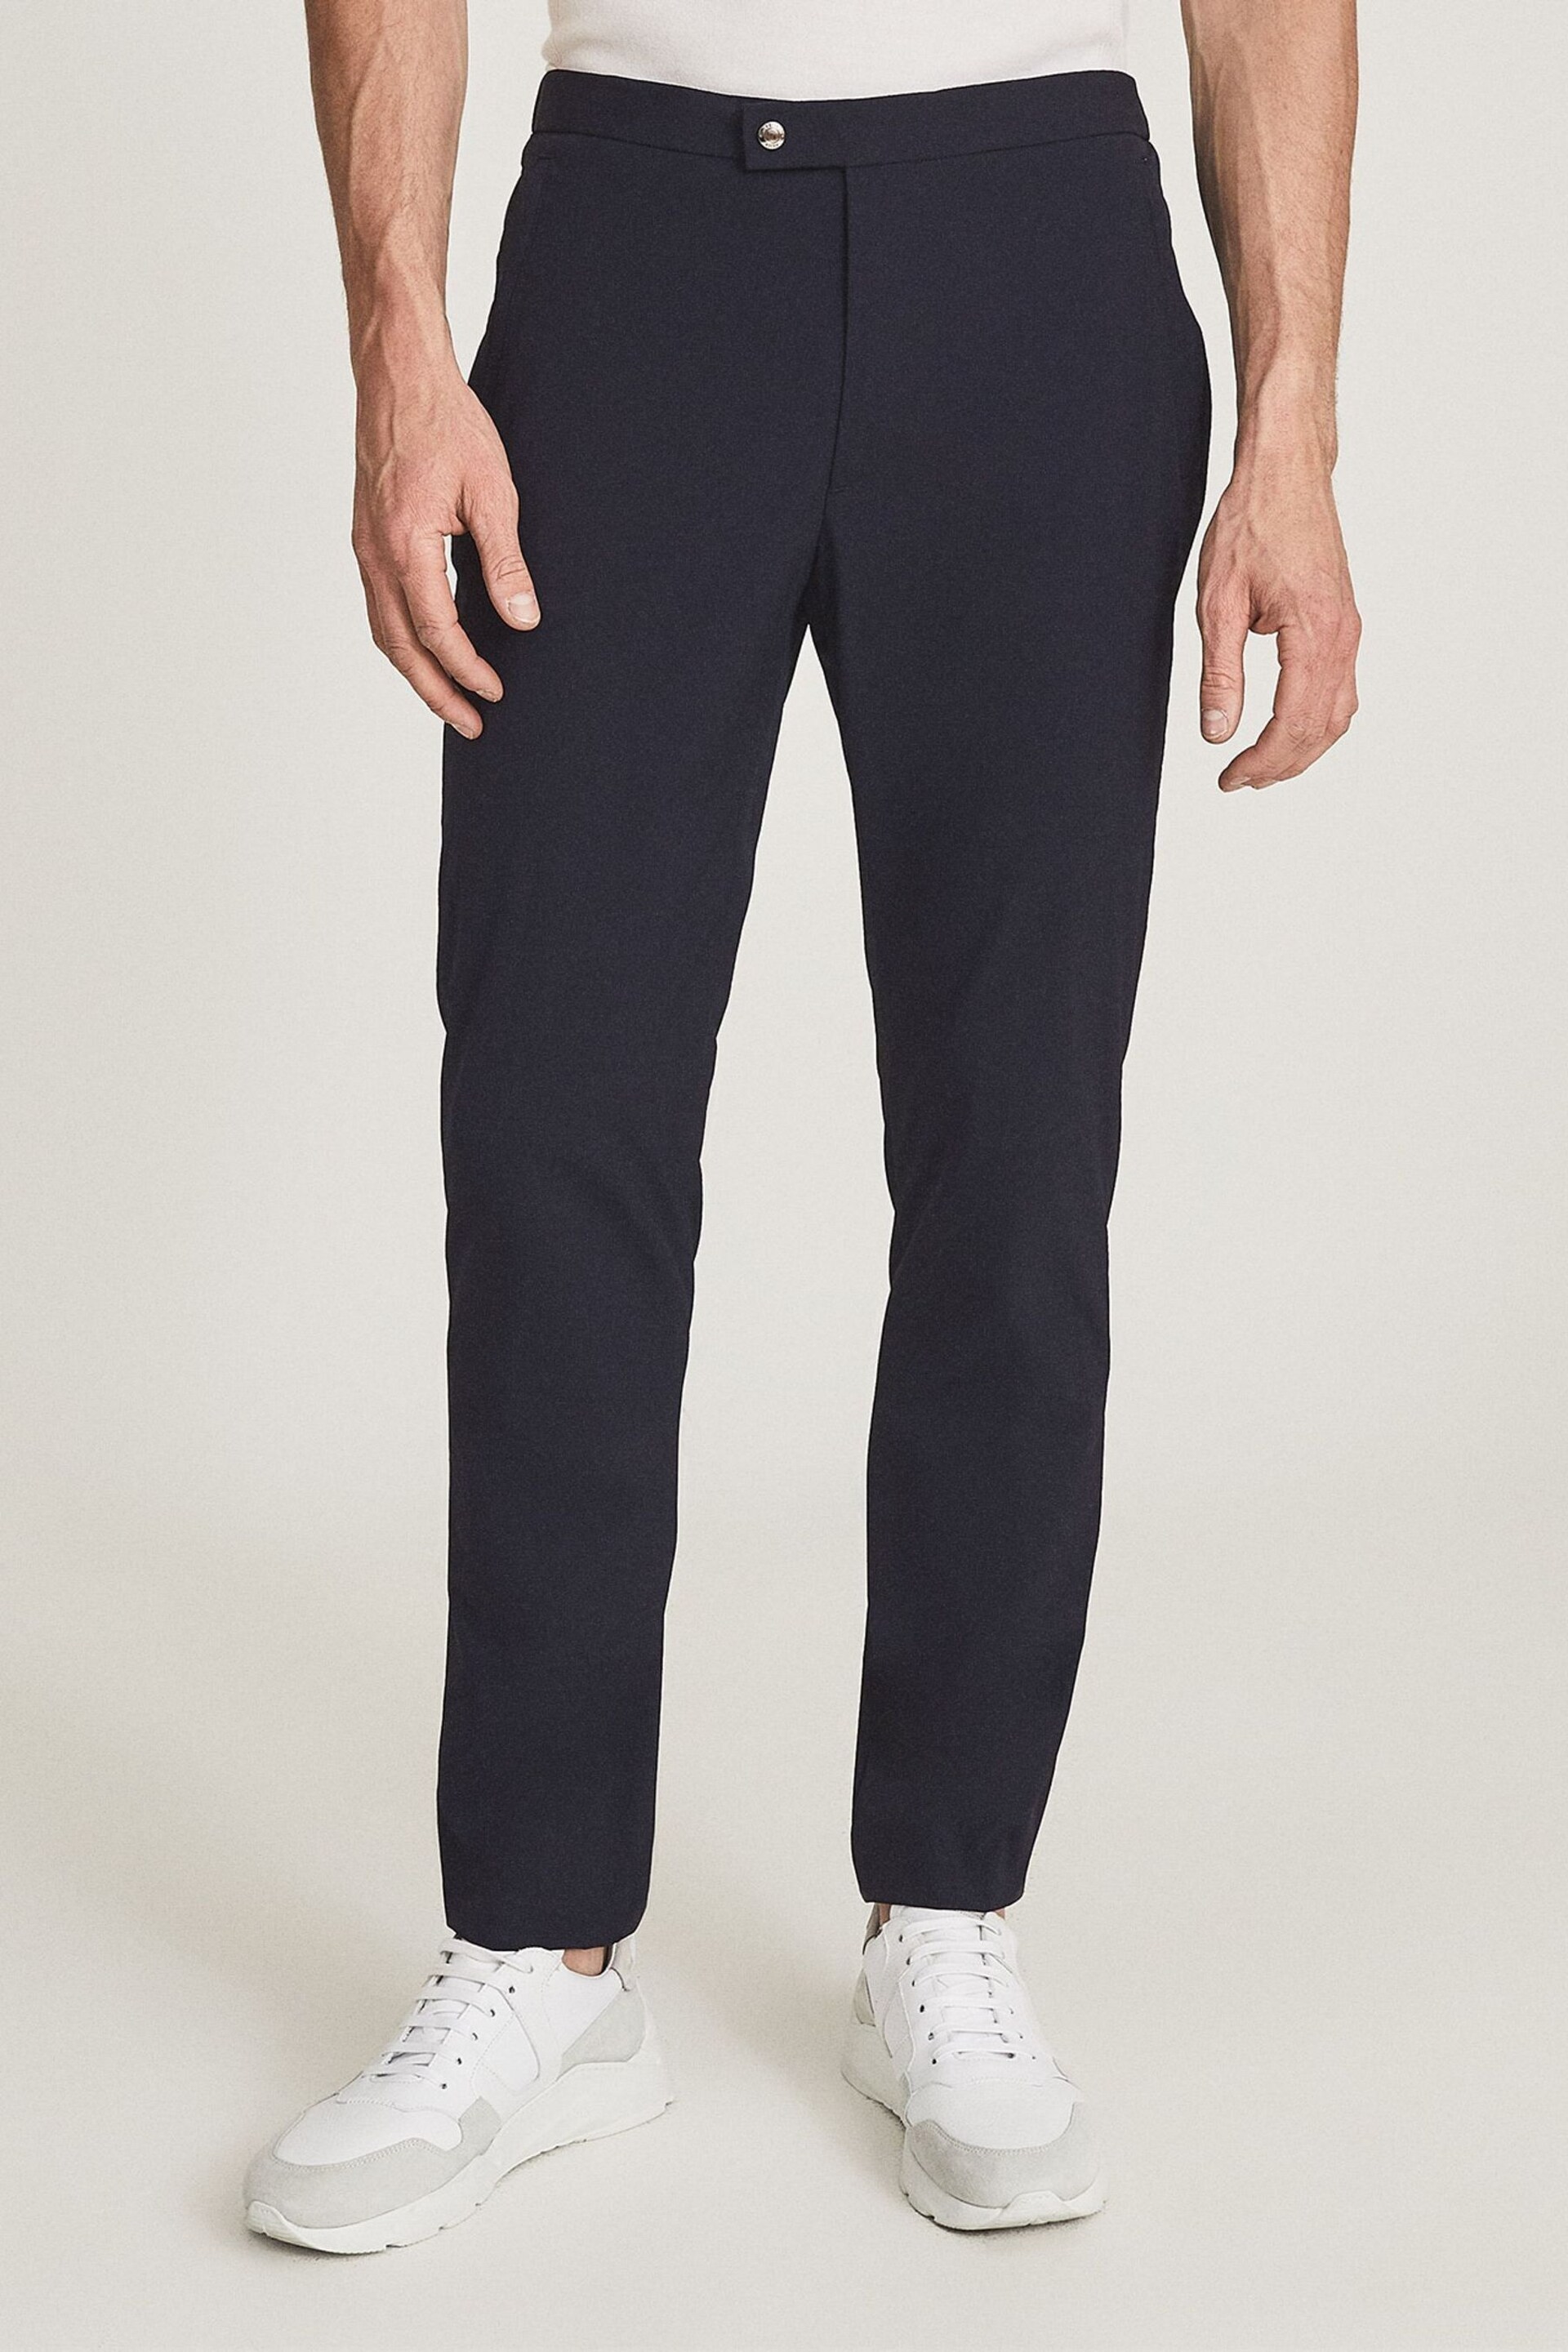 Reiss Navy Ranger Golf Performance Slim Fit Trousers - Image 1 of 5